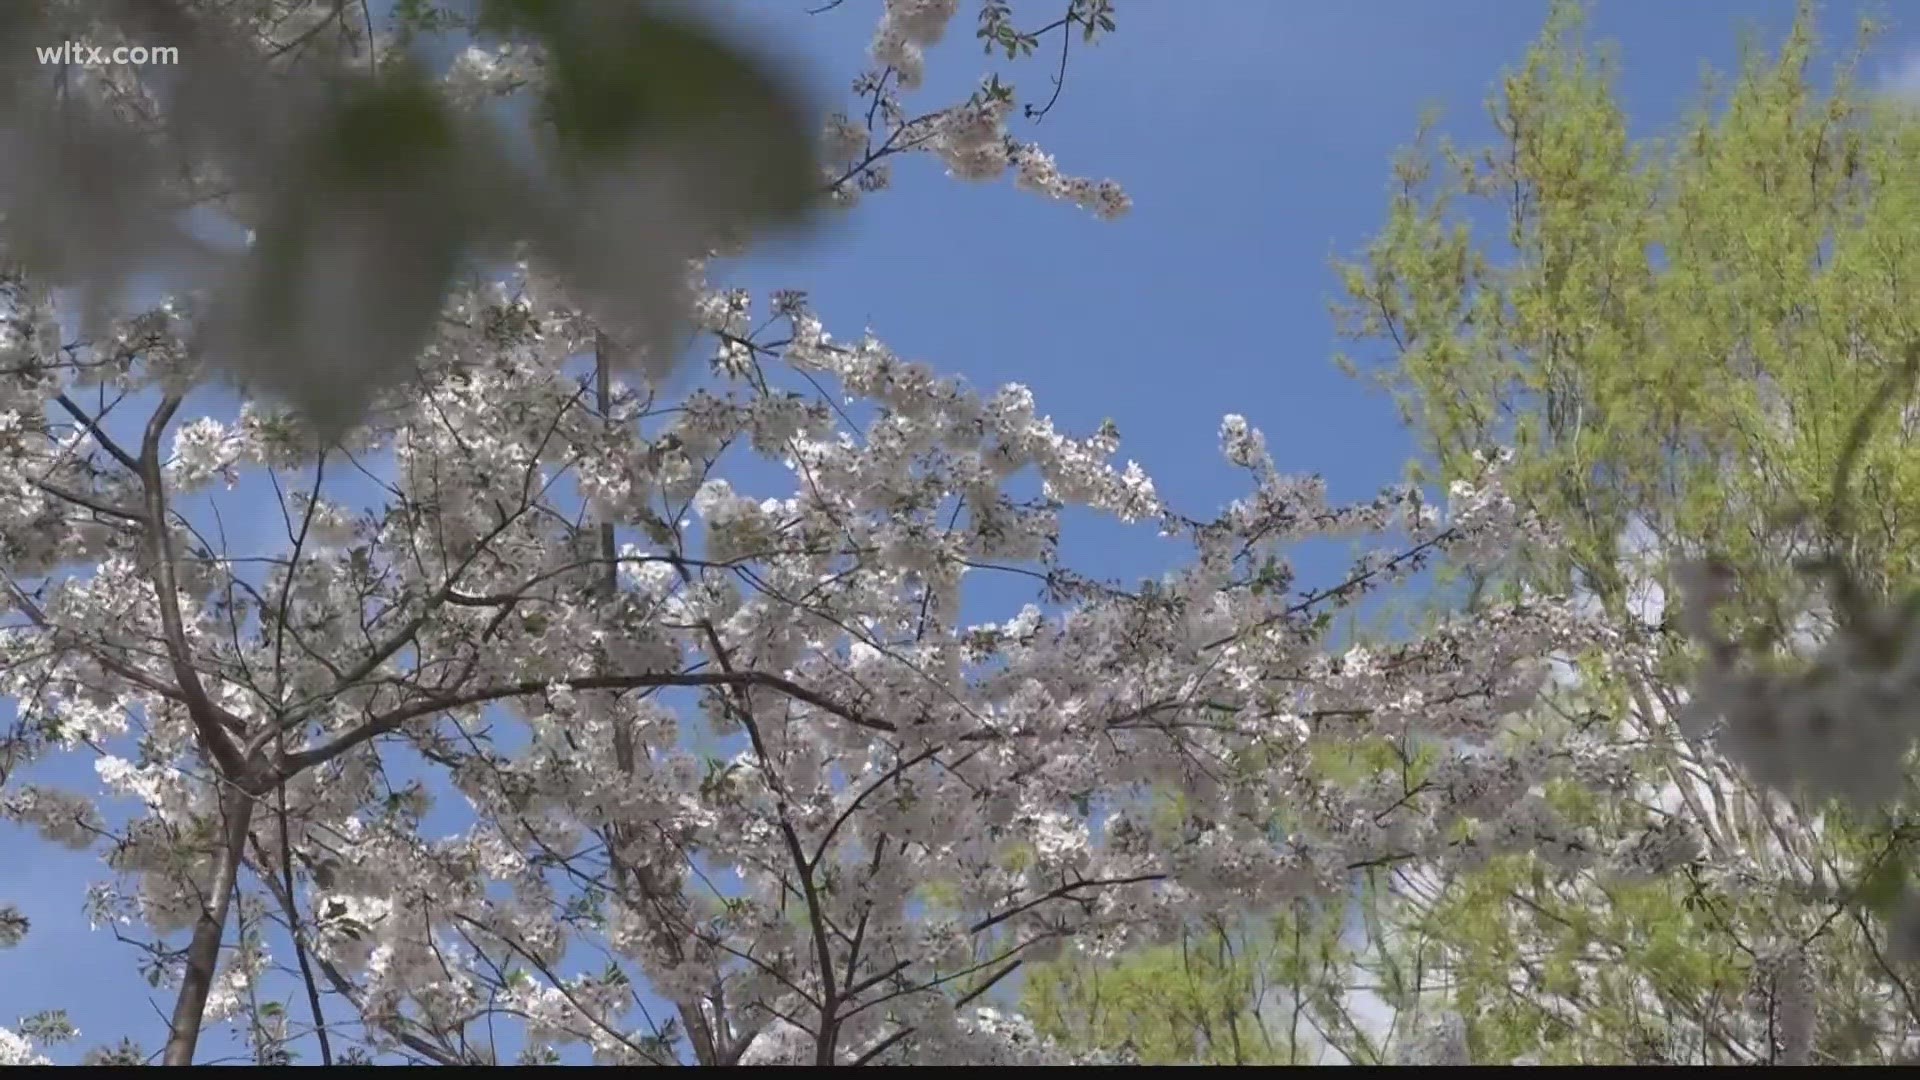 For the past seven years, residents in Irmo have been celebrating this festival that marks the beginning of spring.